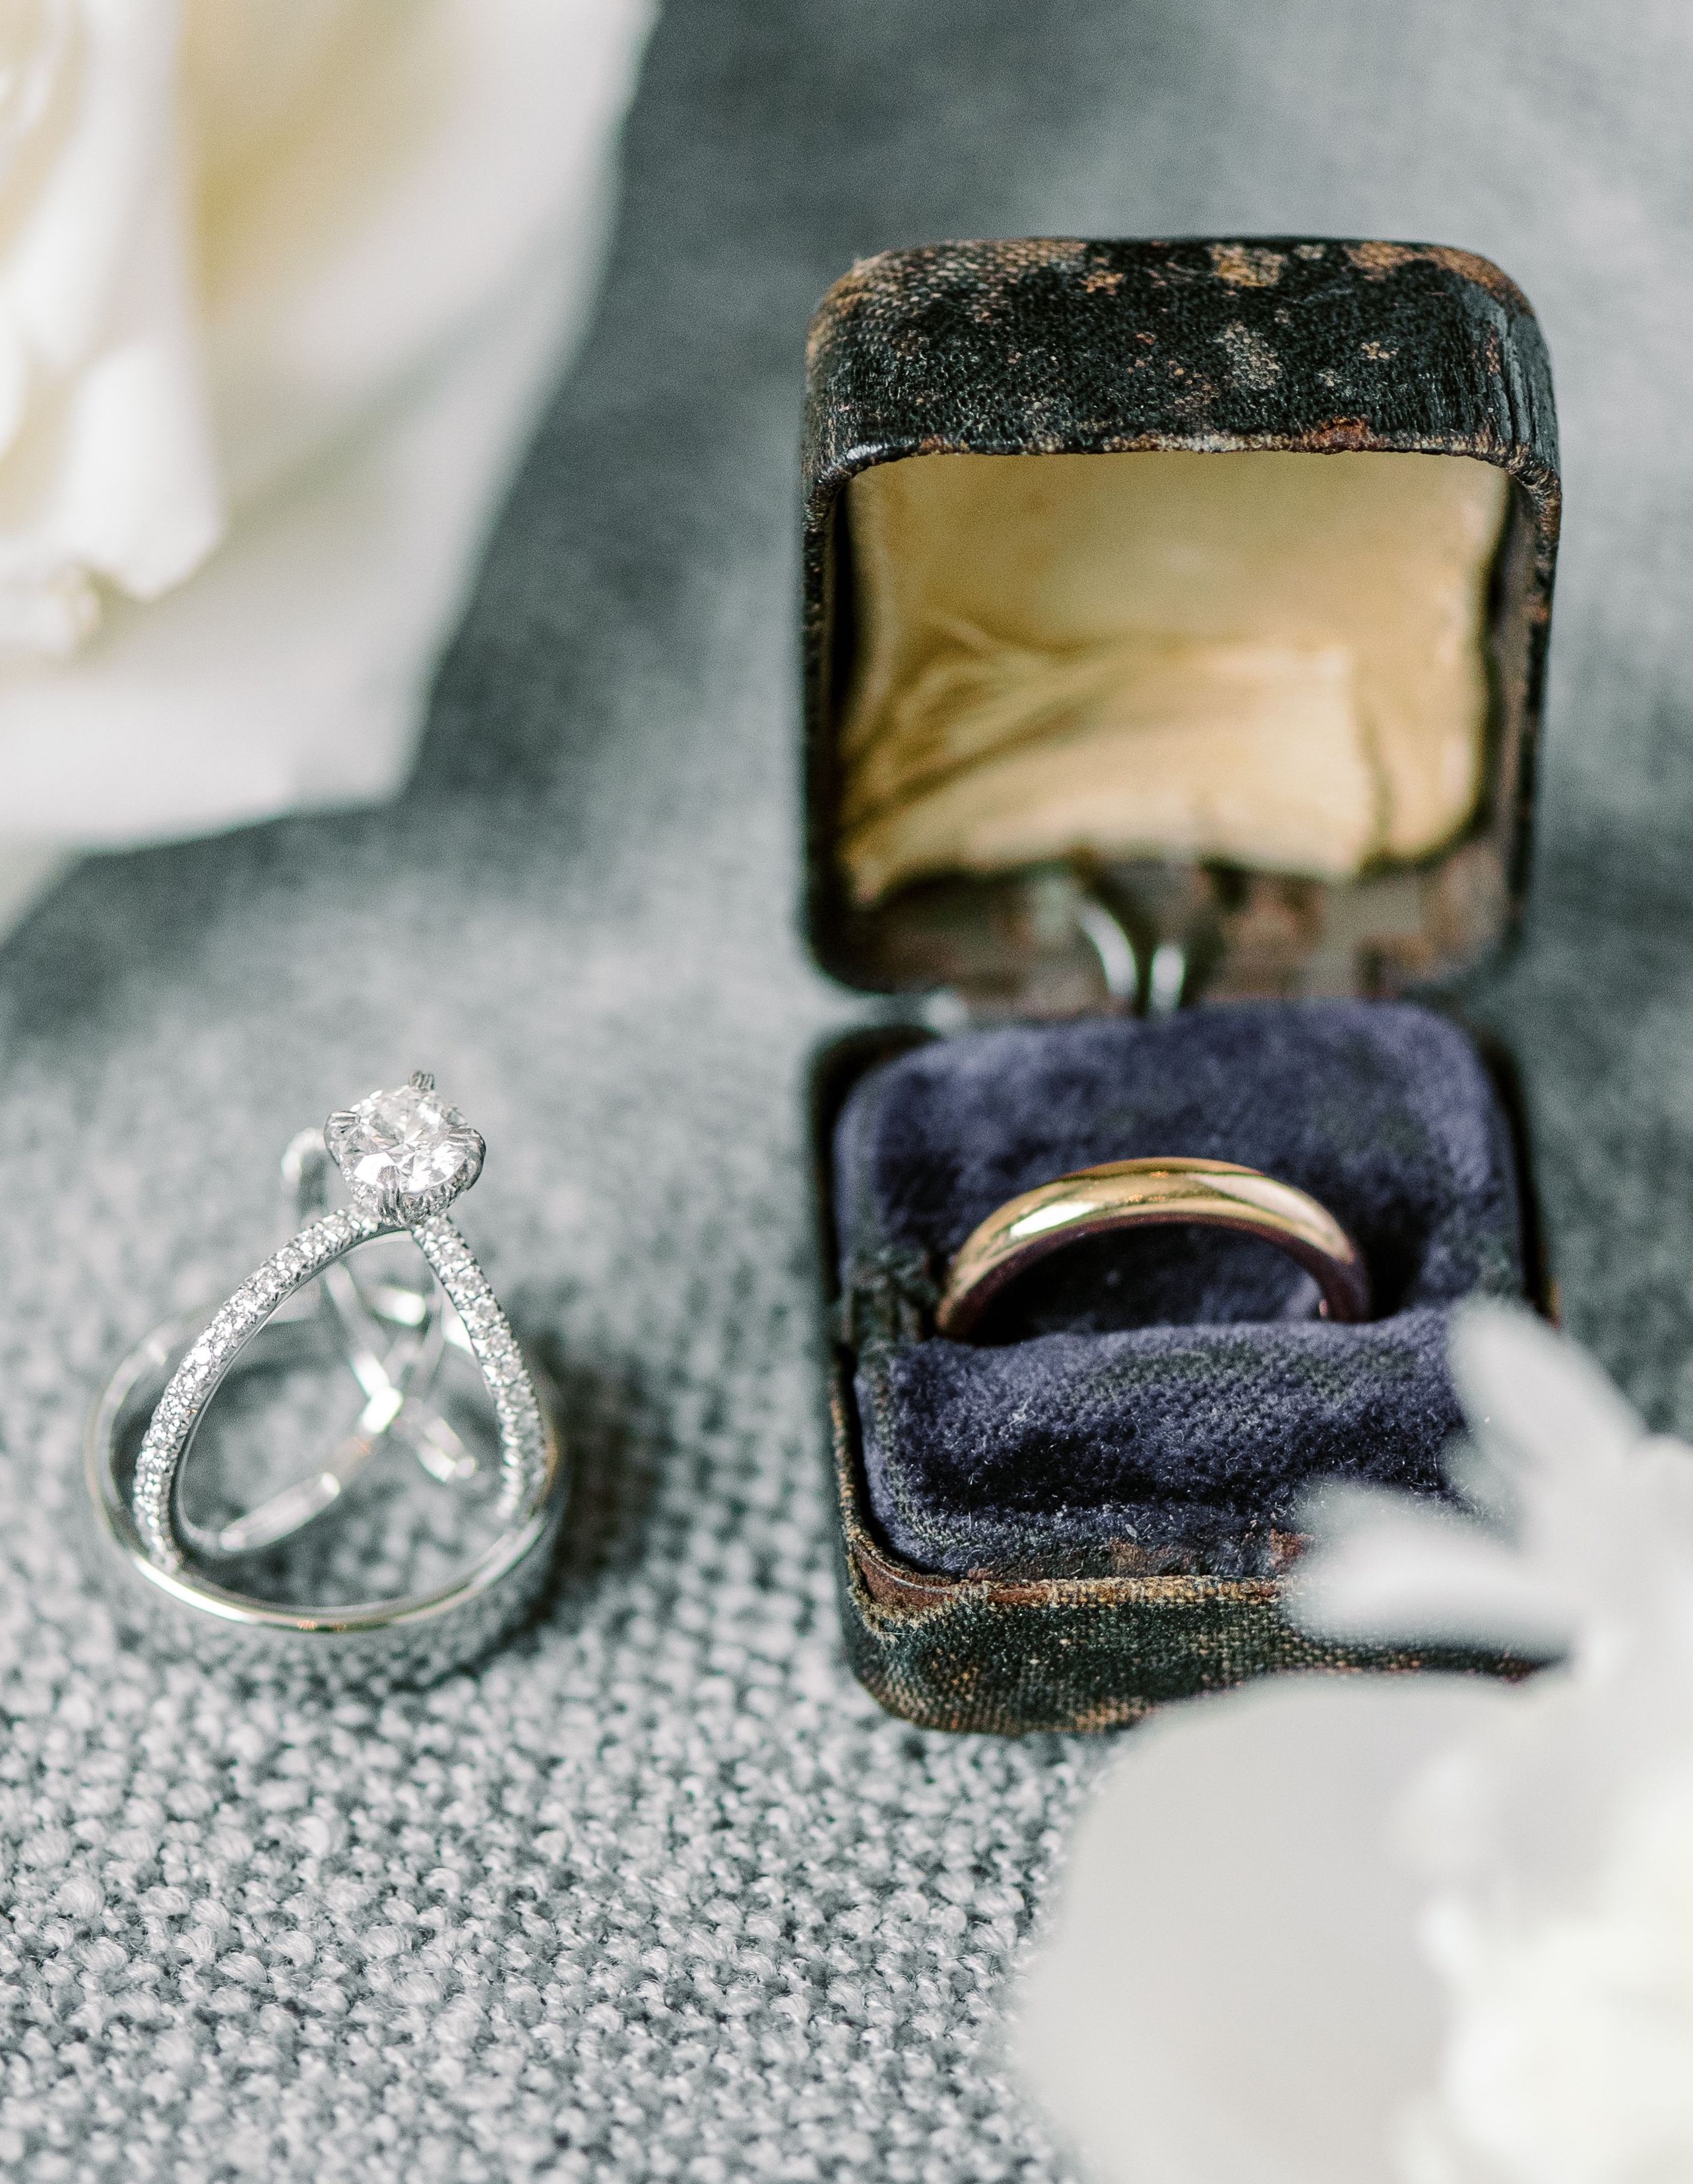 The bride's classic wedding ring and the groom's ring beside each other.